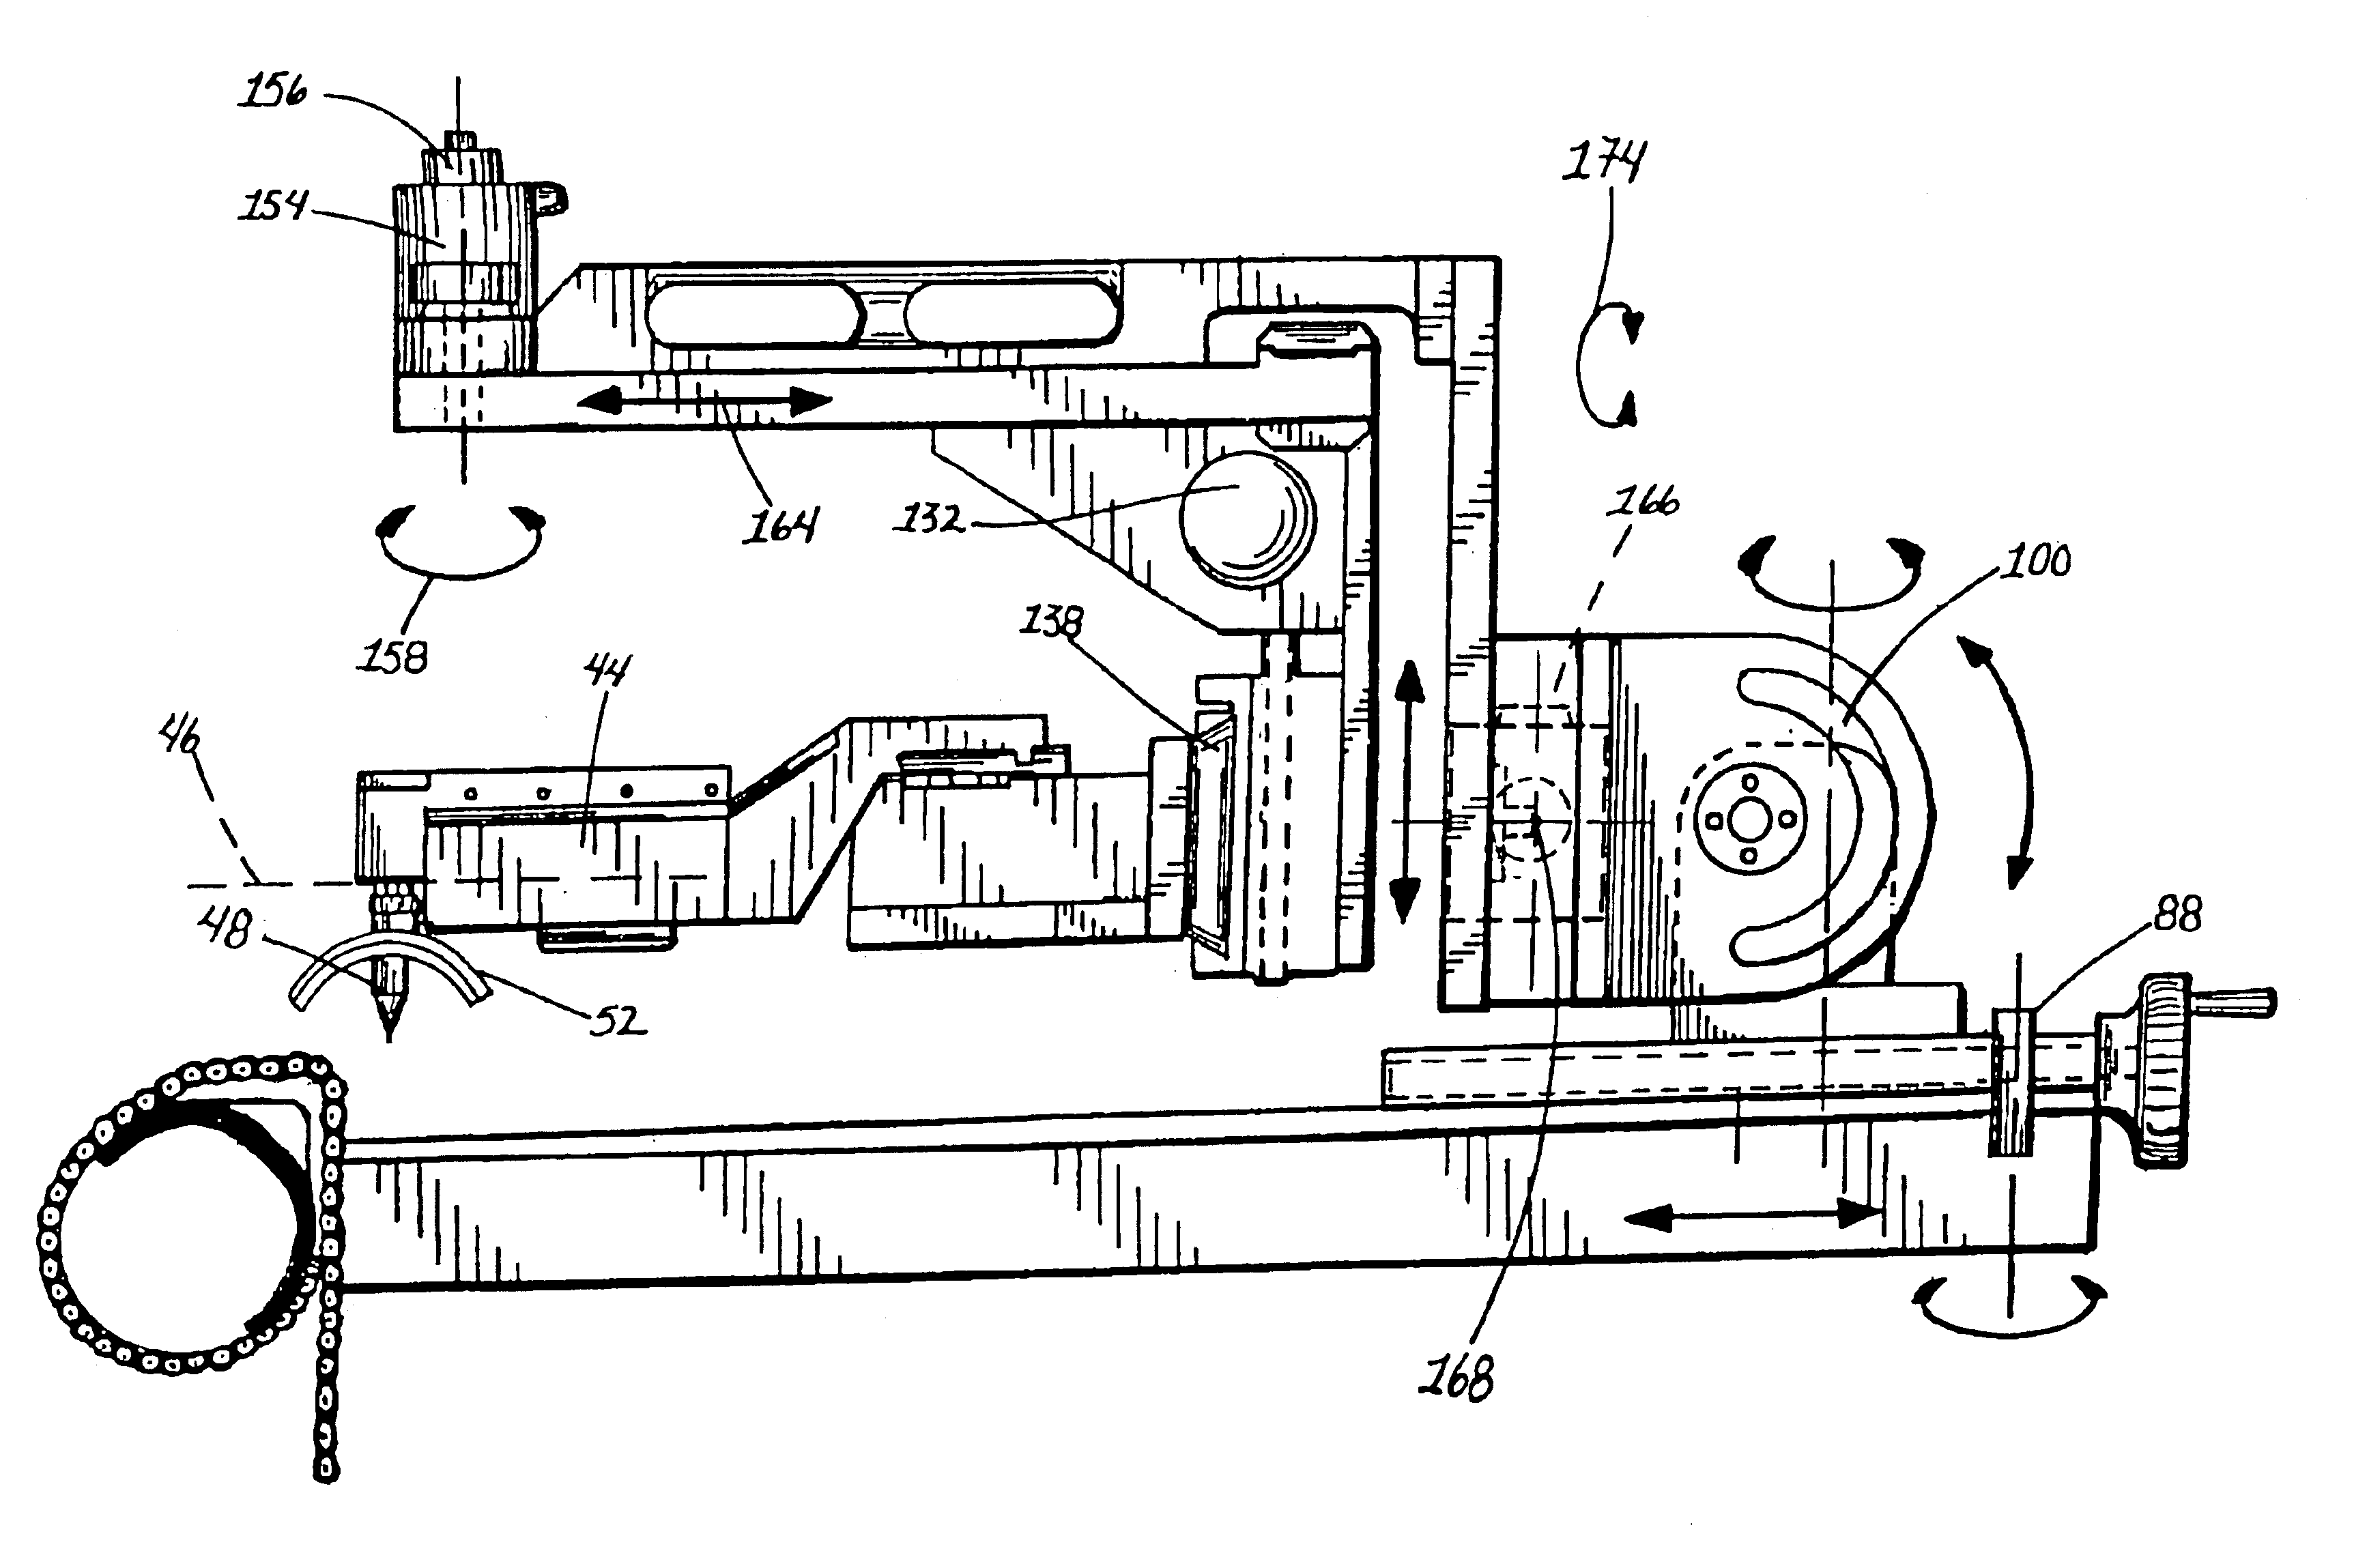 X-ray diffraction apparatus and method